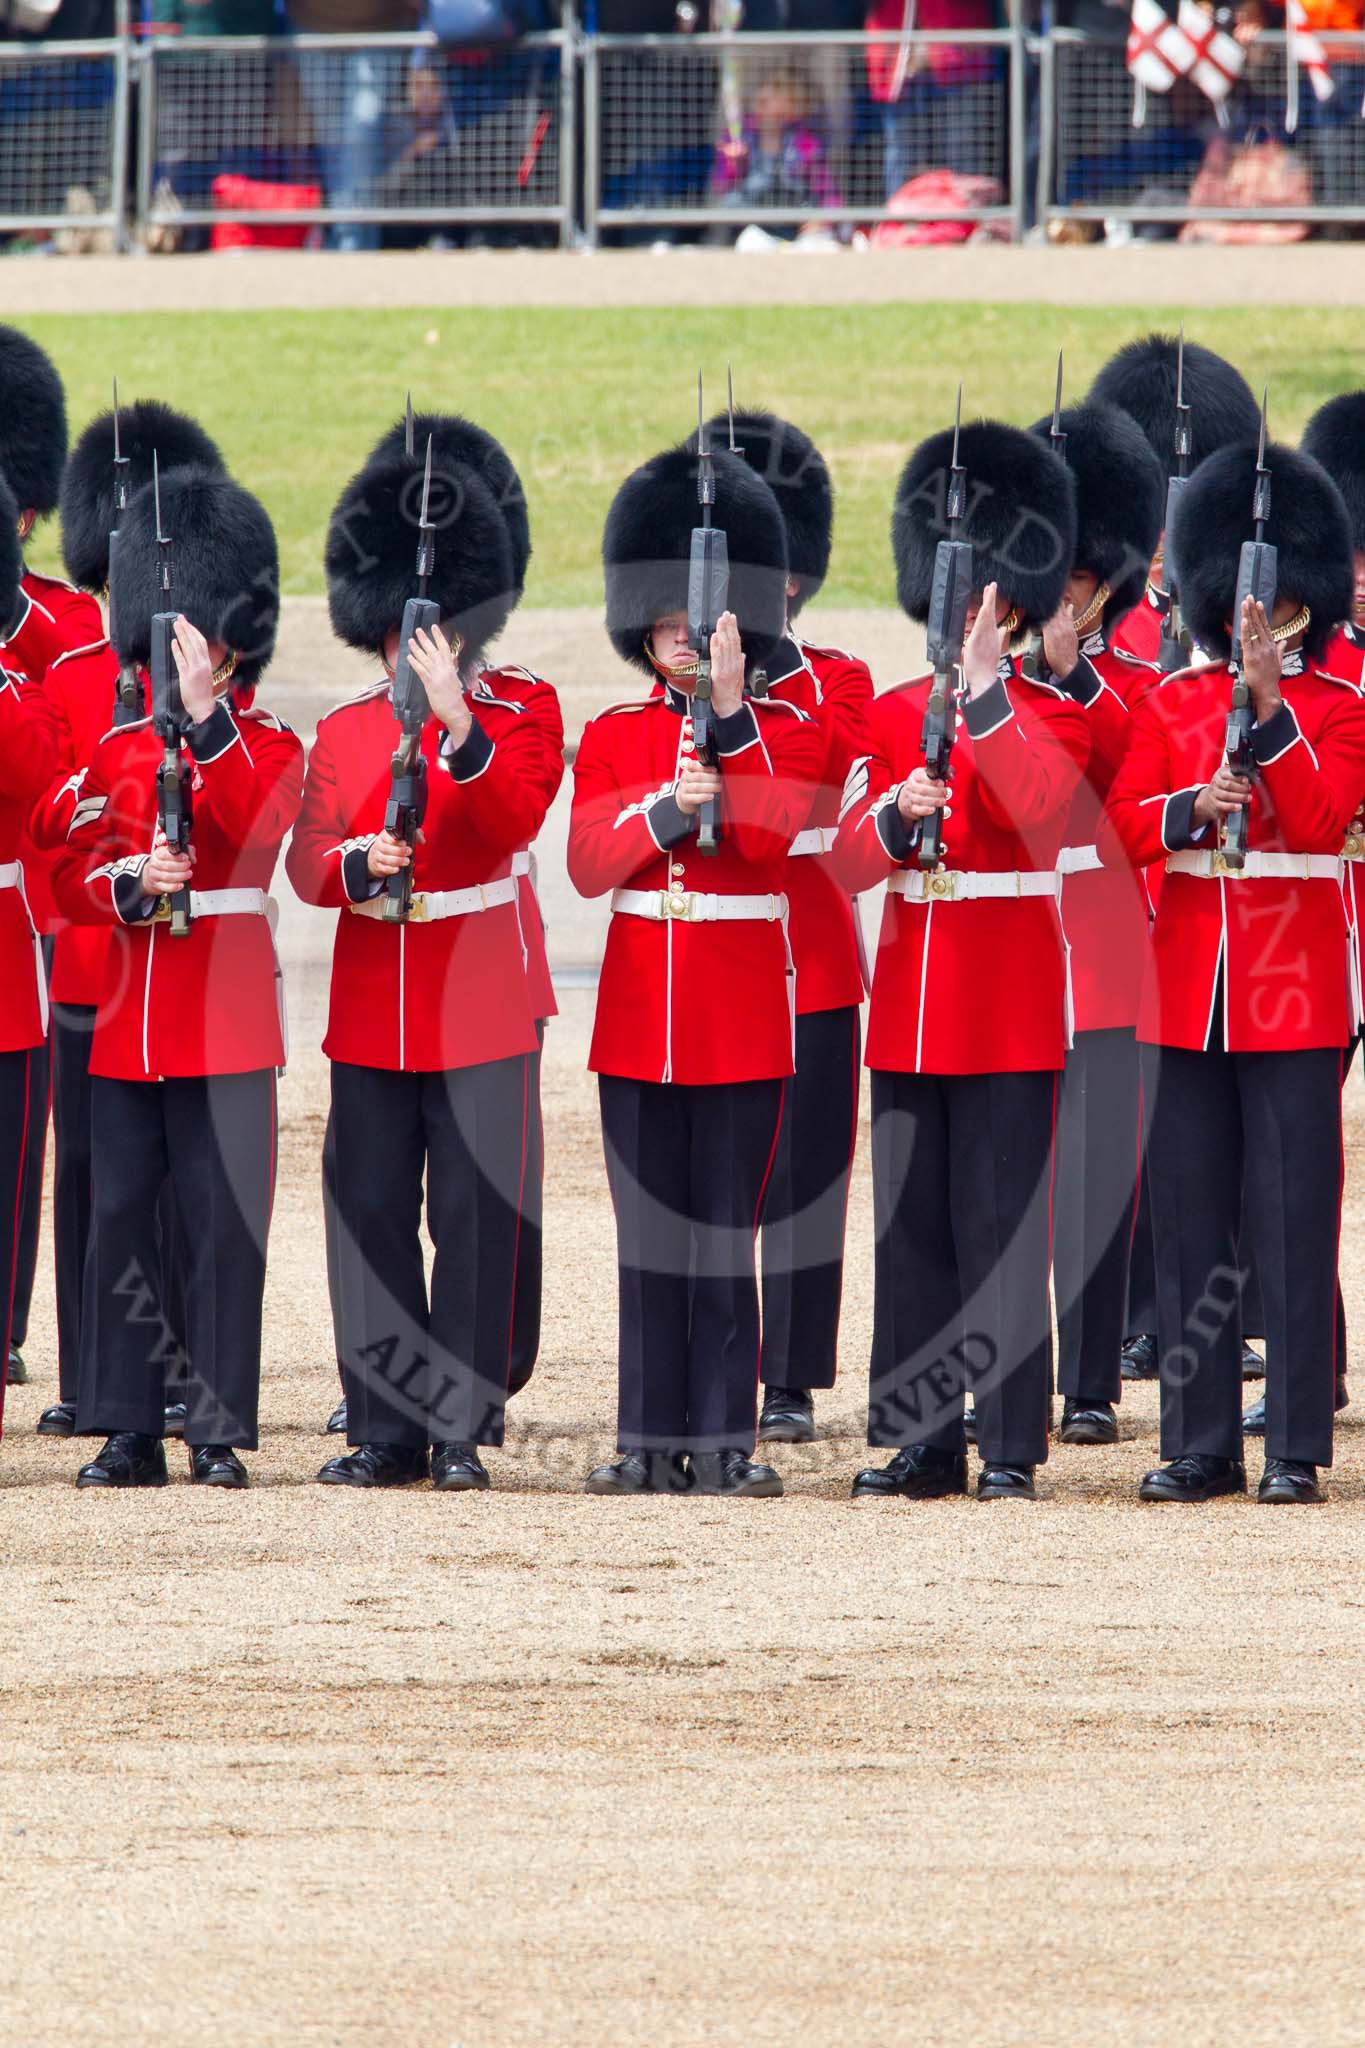 Trooping the Colour 2011: No. 2 Guard, B Company Scots Guards, presenting arms, as the Colour is trooped along the line of guards..
Horse Guards Parade, Westminster,
London SW1,
Greater London,
United Kingdom,
on 11 June 2011 at 11:28, image #217